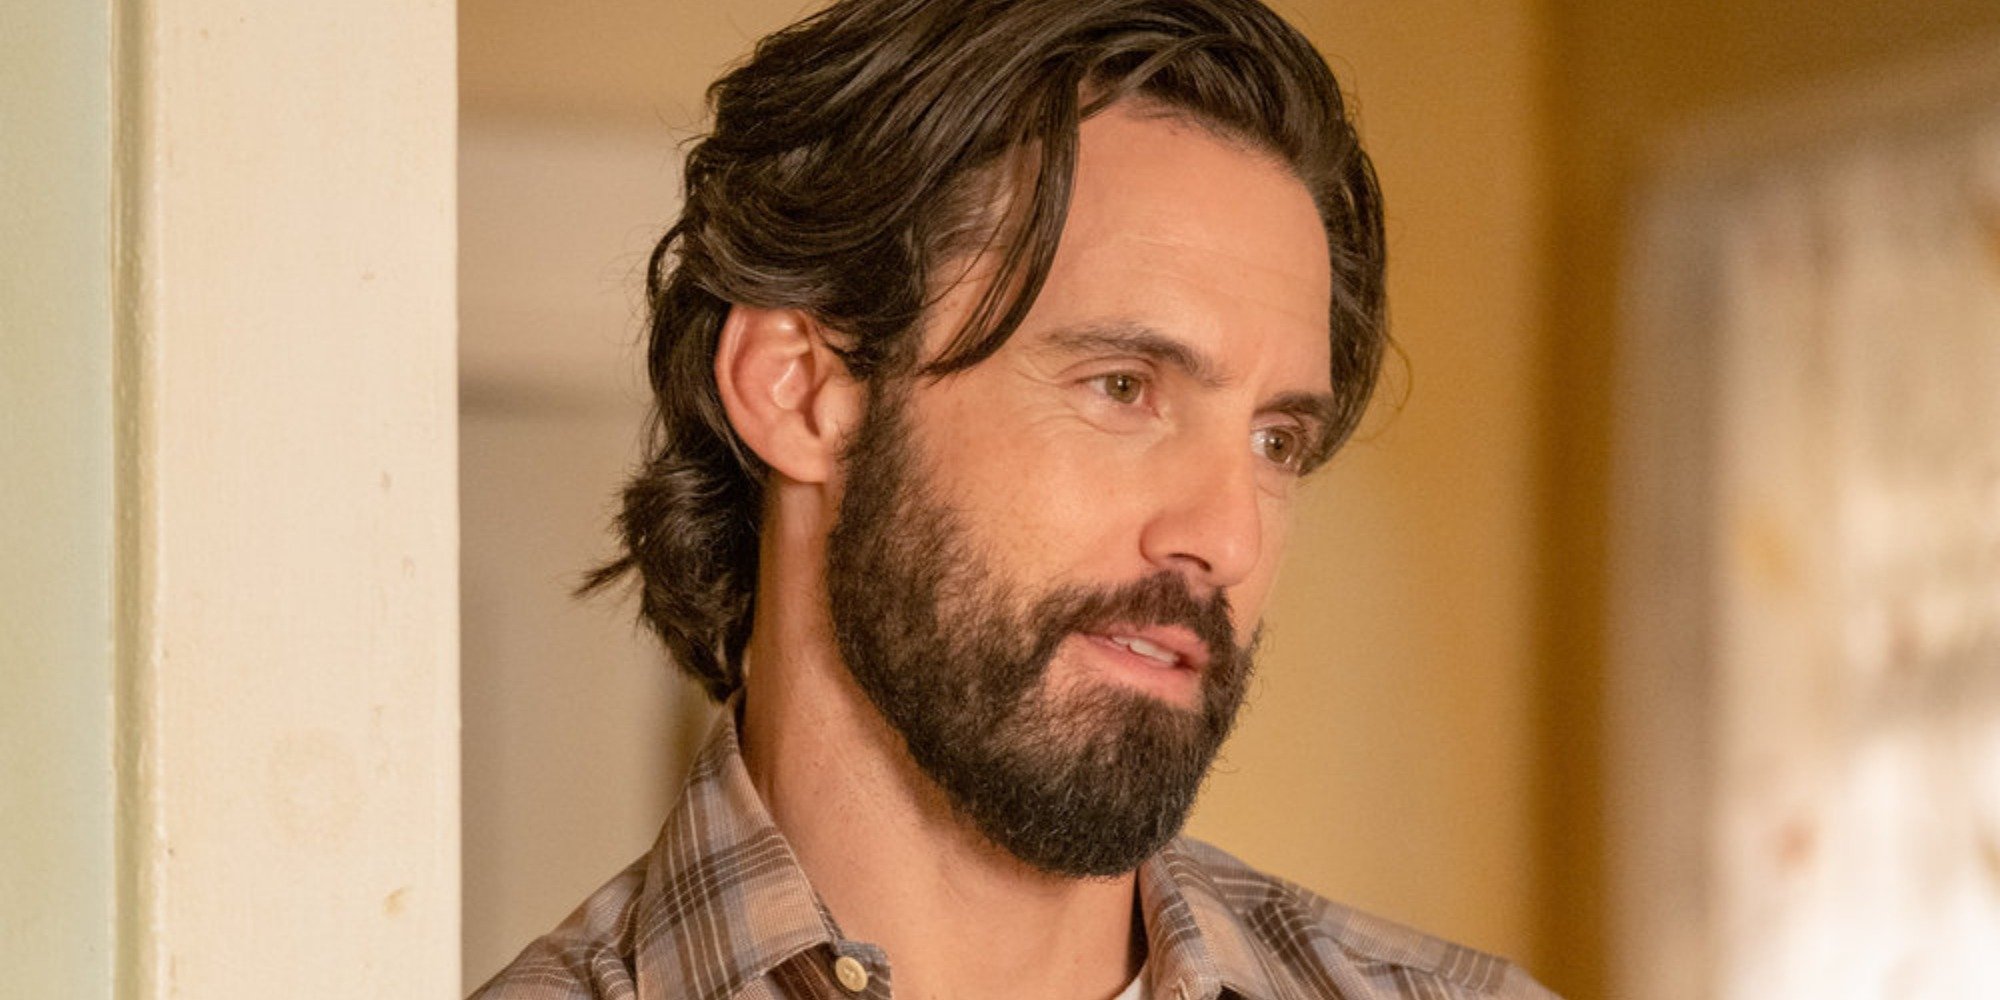 Milo Ventimiglia on the set of This Is Us.